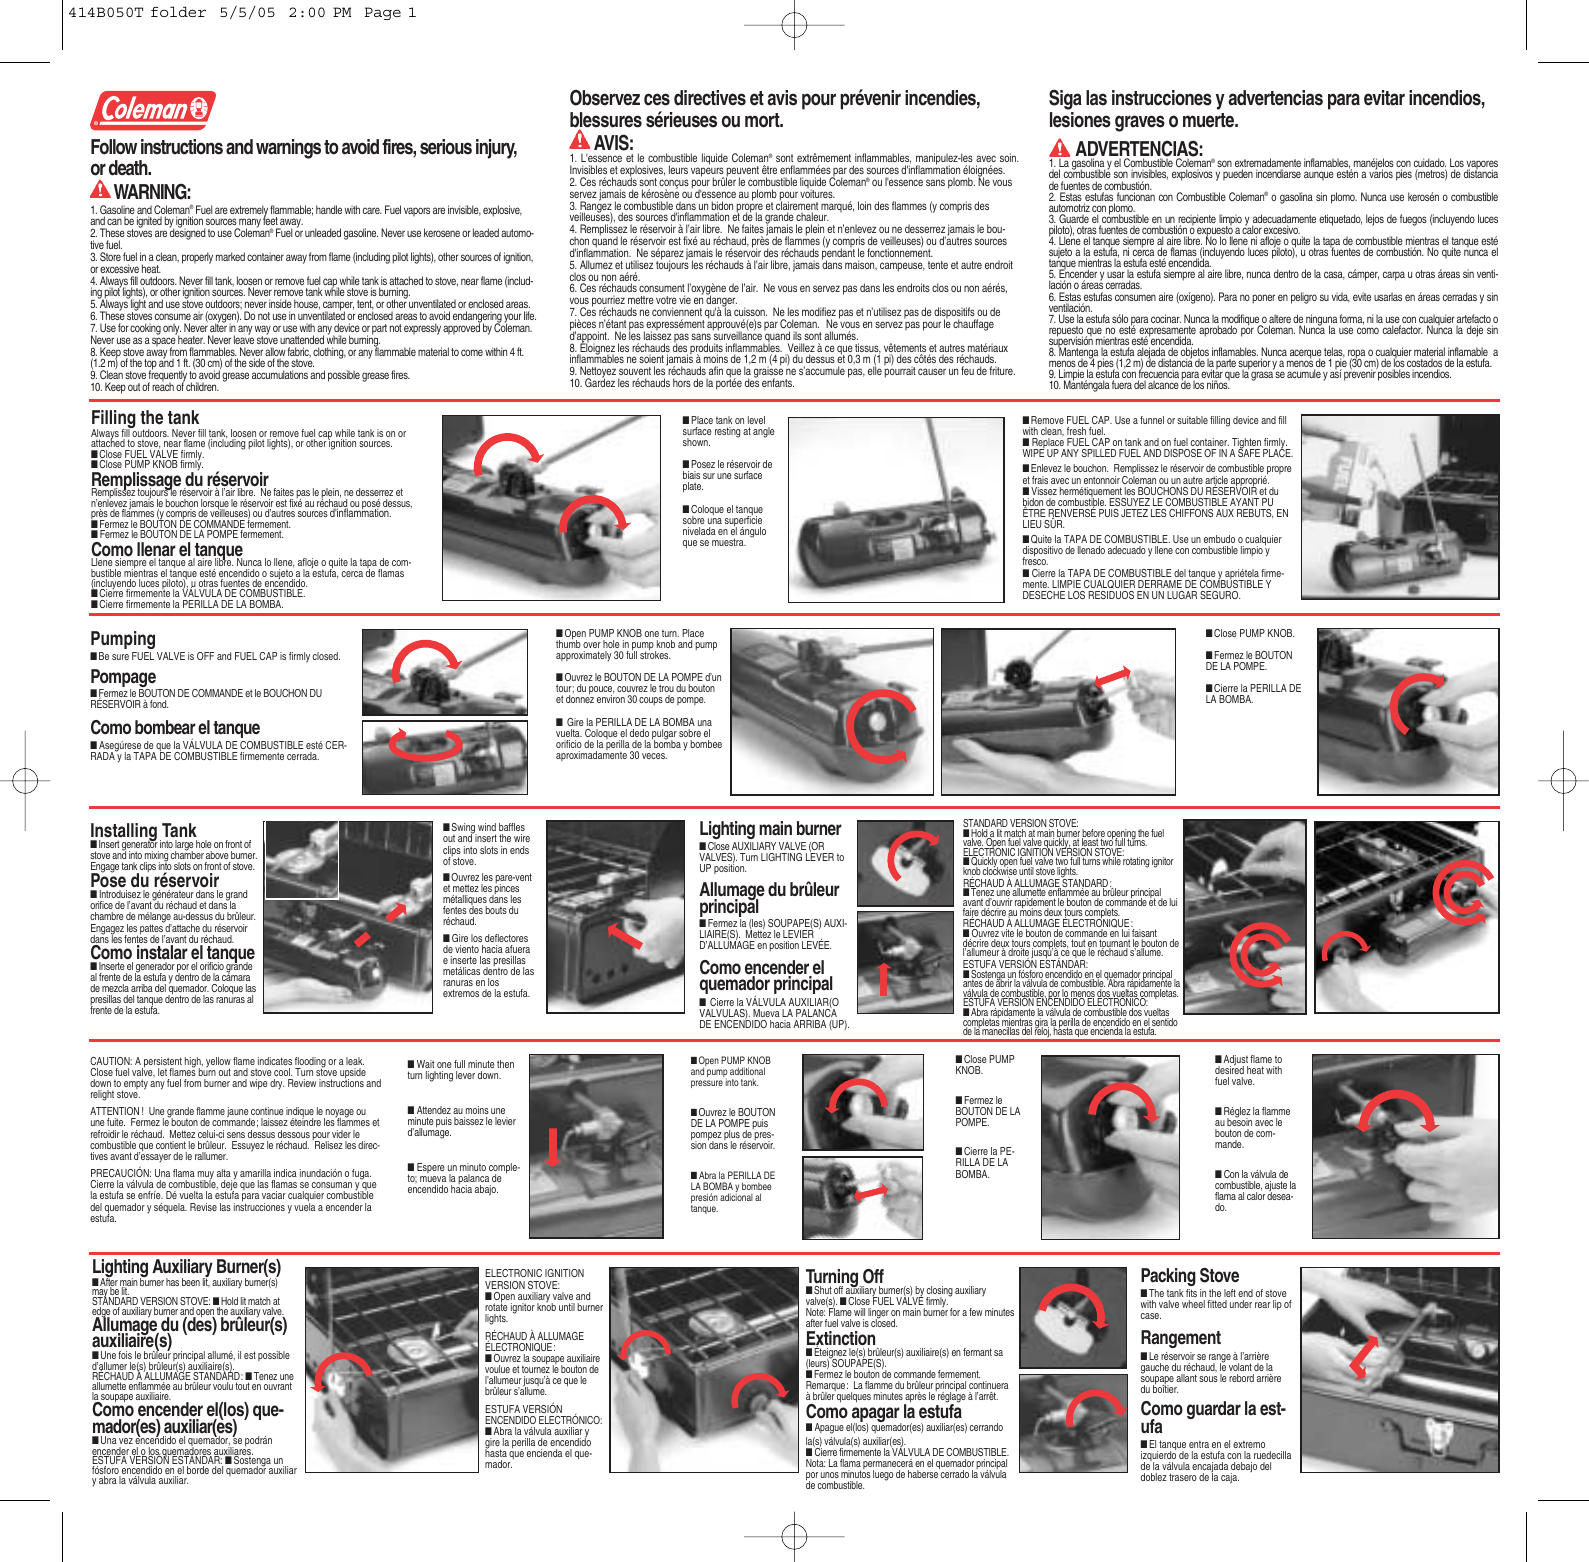 Page 2 of 2 - Coleman Coleman-Dual-Fuel-Stove-Users-Manual- 414, 424, 428 Series Dual Fuel Stove  Coleman-dual-fuel-stove-users-manual